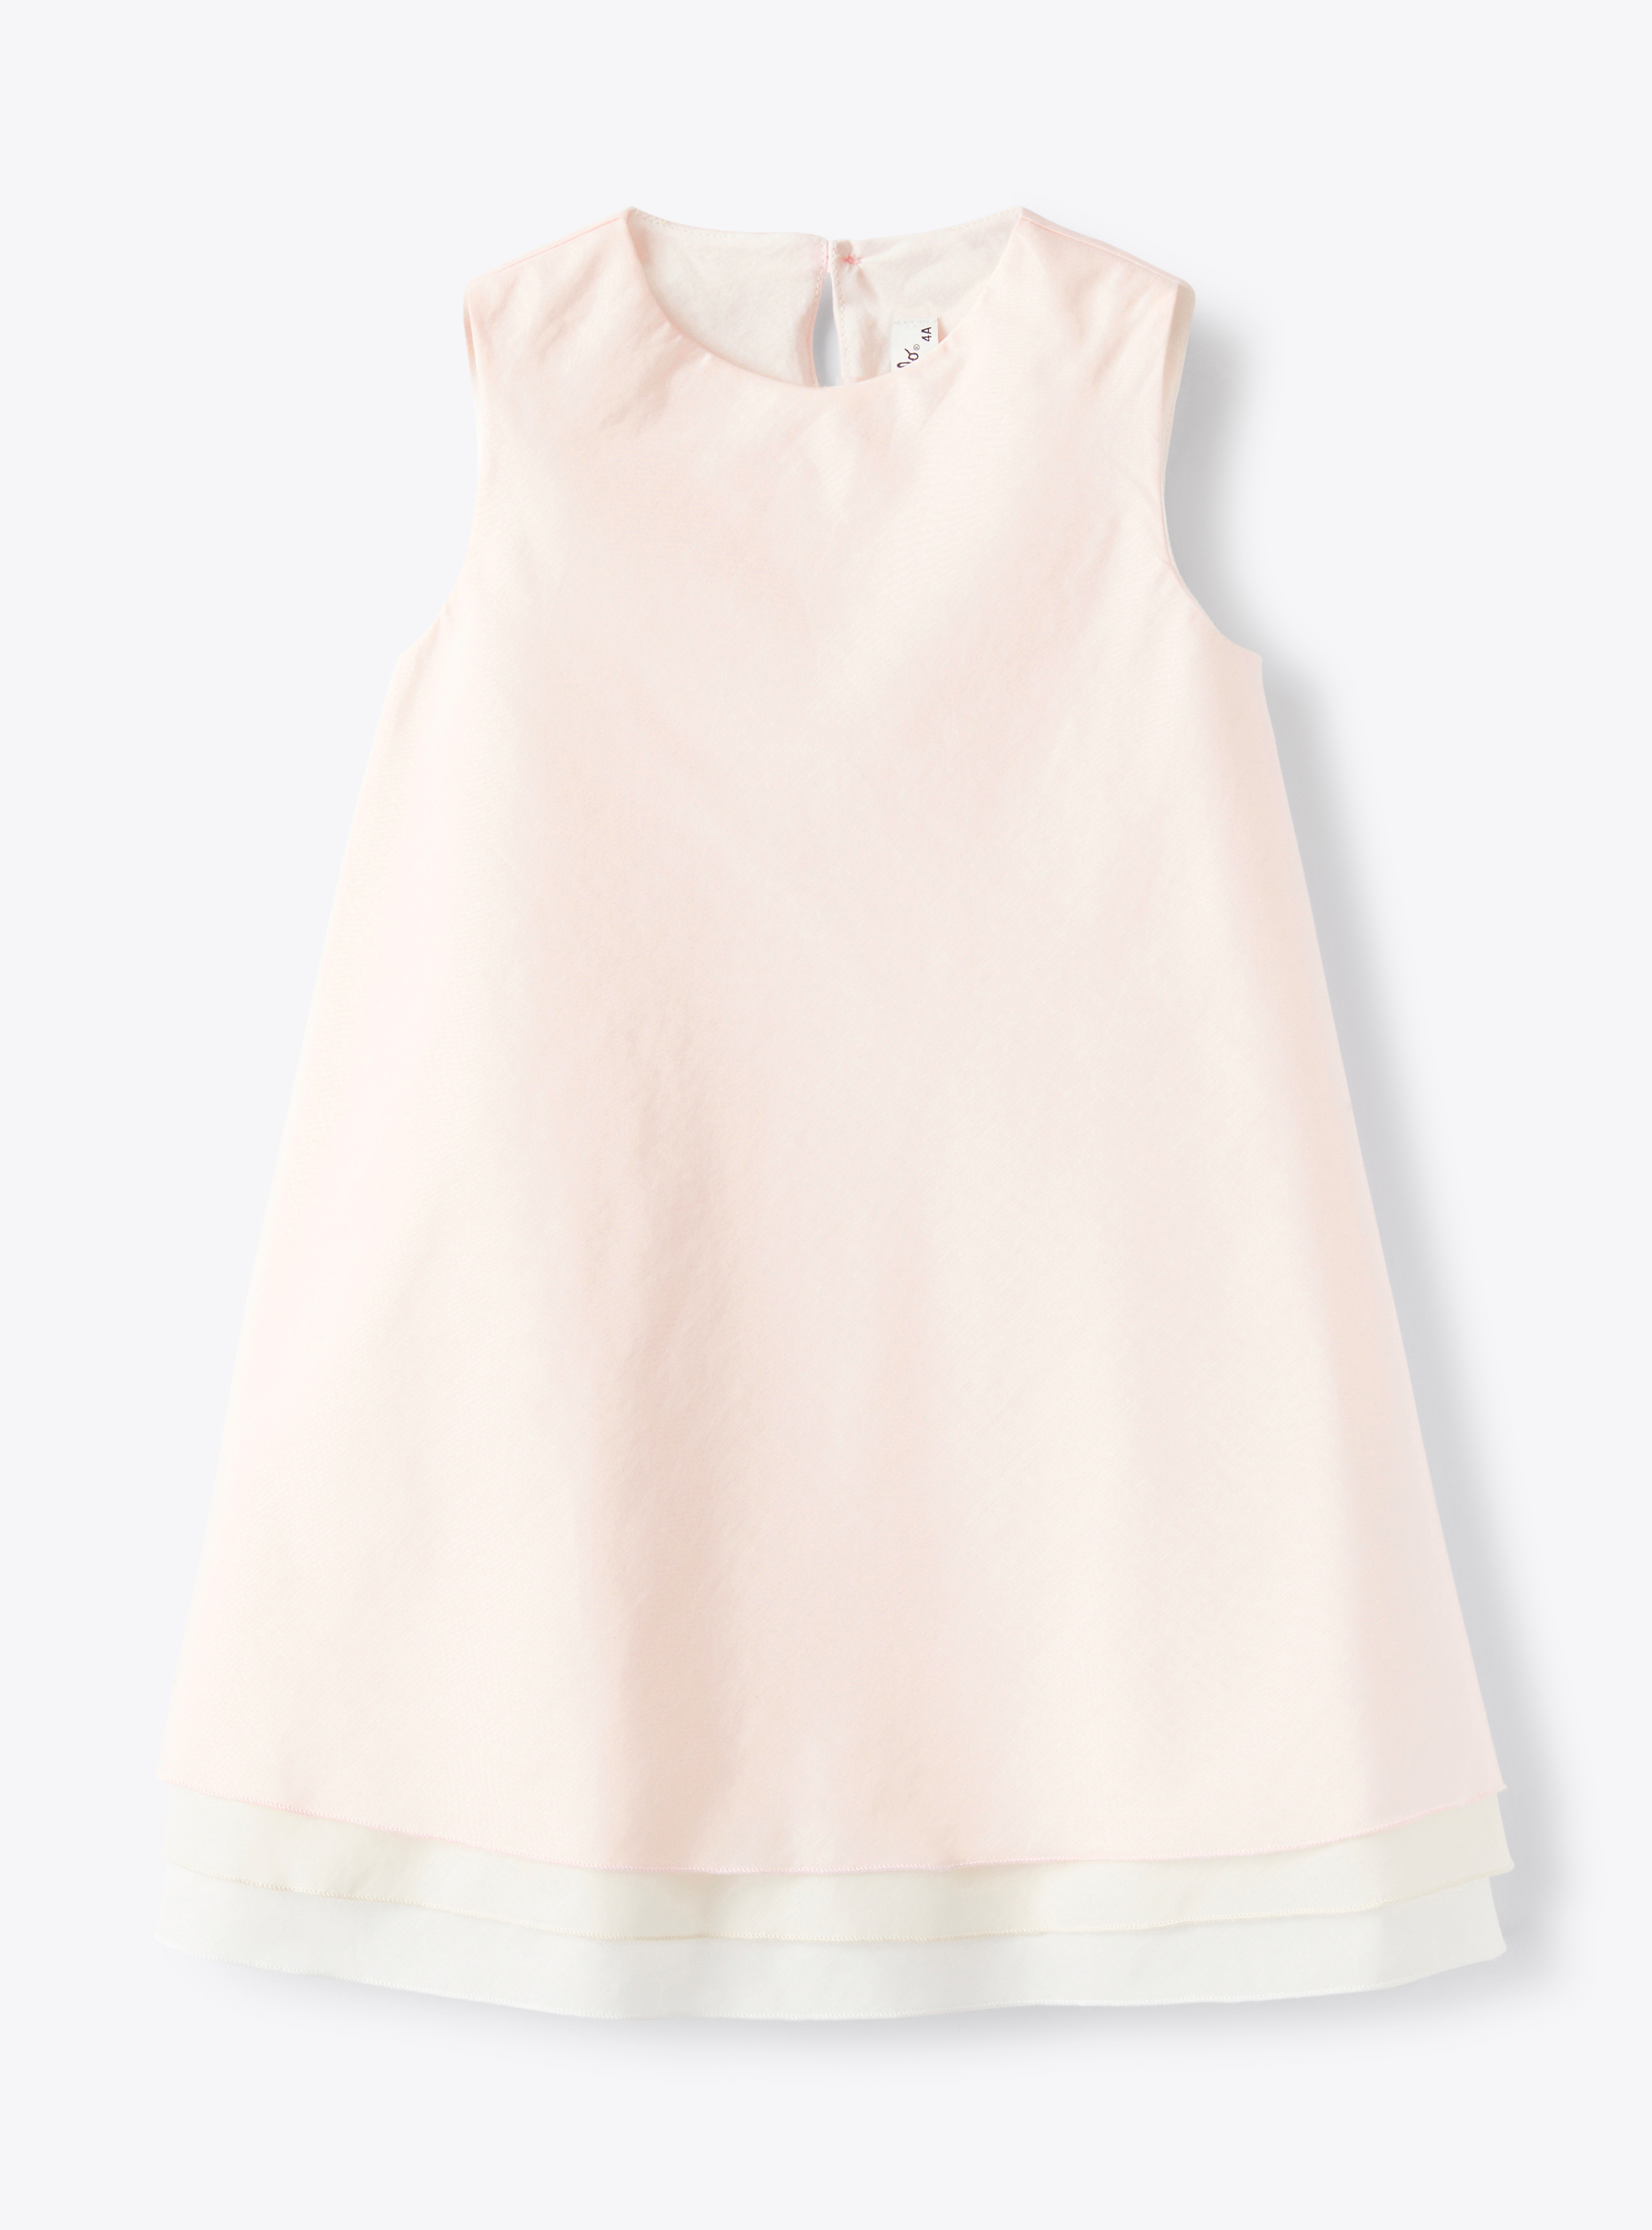 Dress in pearl-pink cotton voile with three tiers - Dresses - Il Gufo